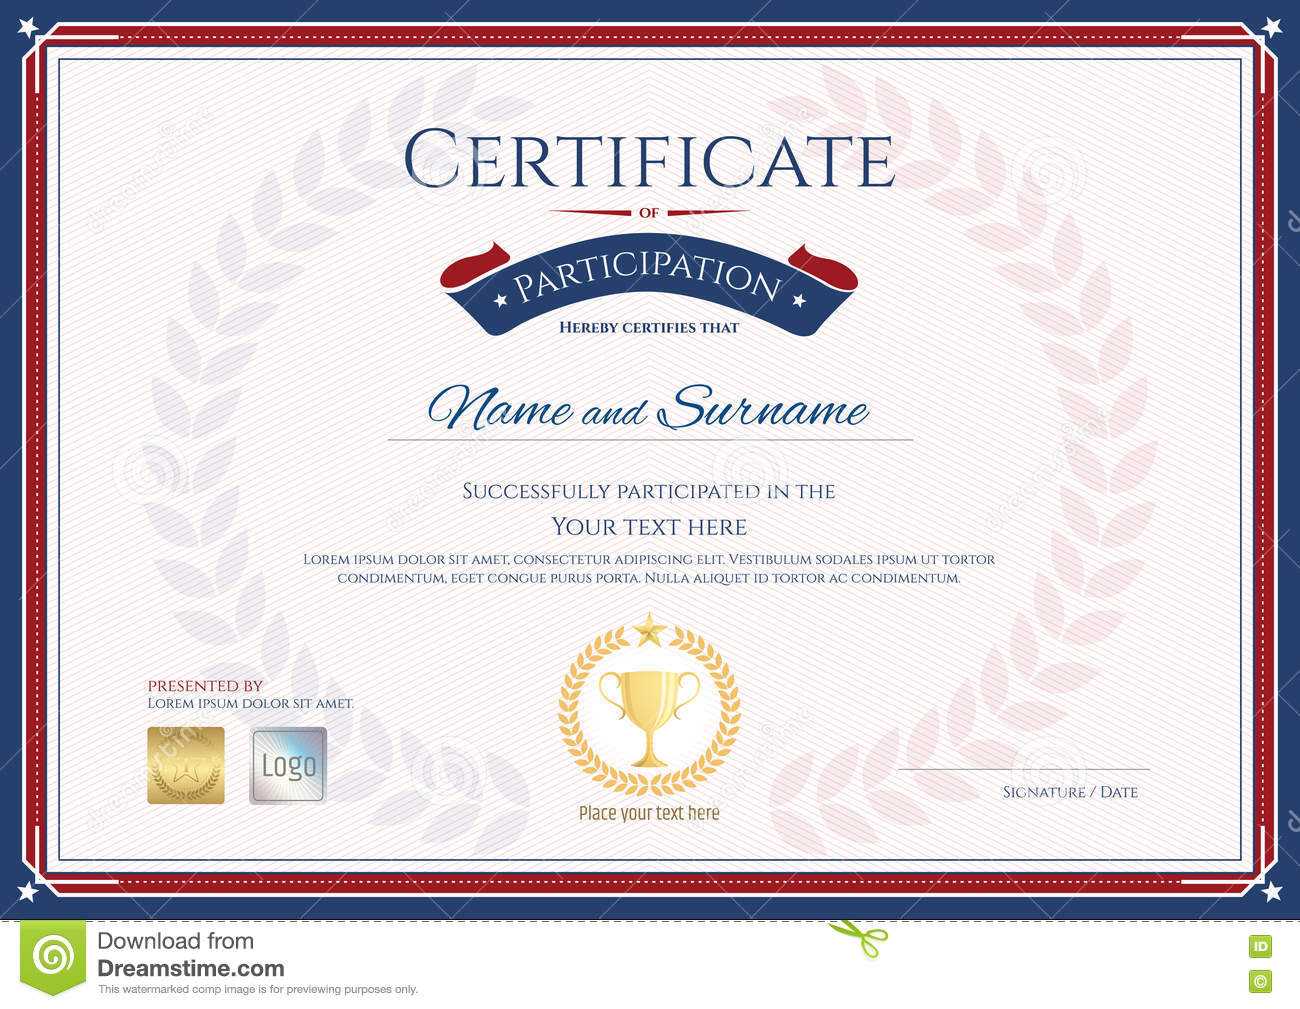 Certificate Of Participation Free Template – Calep Within Certification Of Participation Free Template